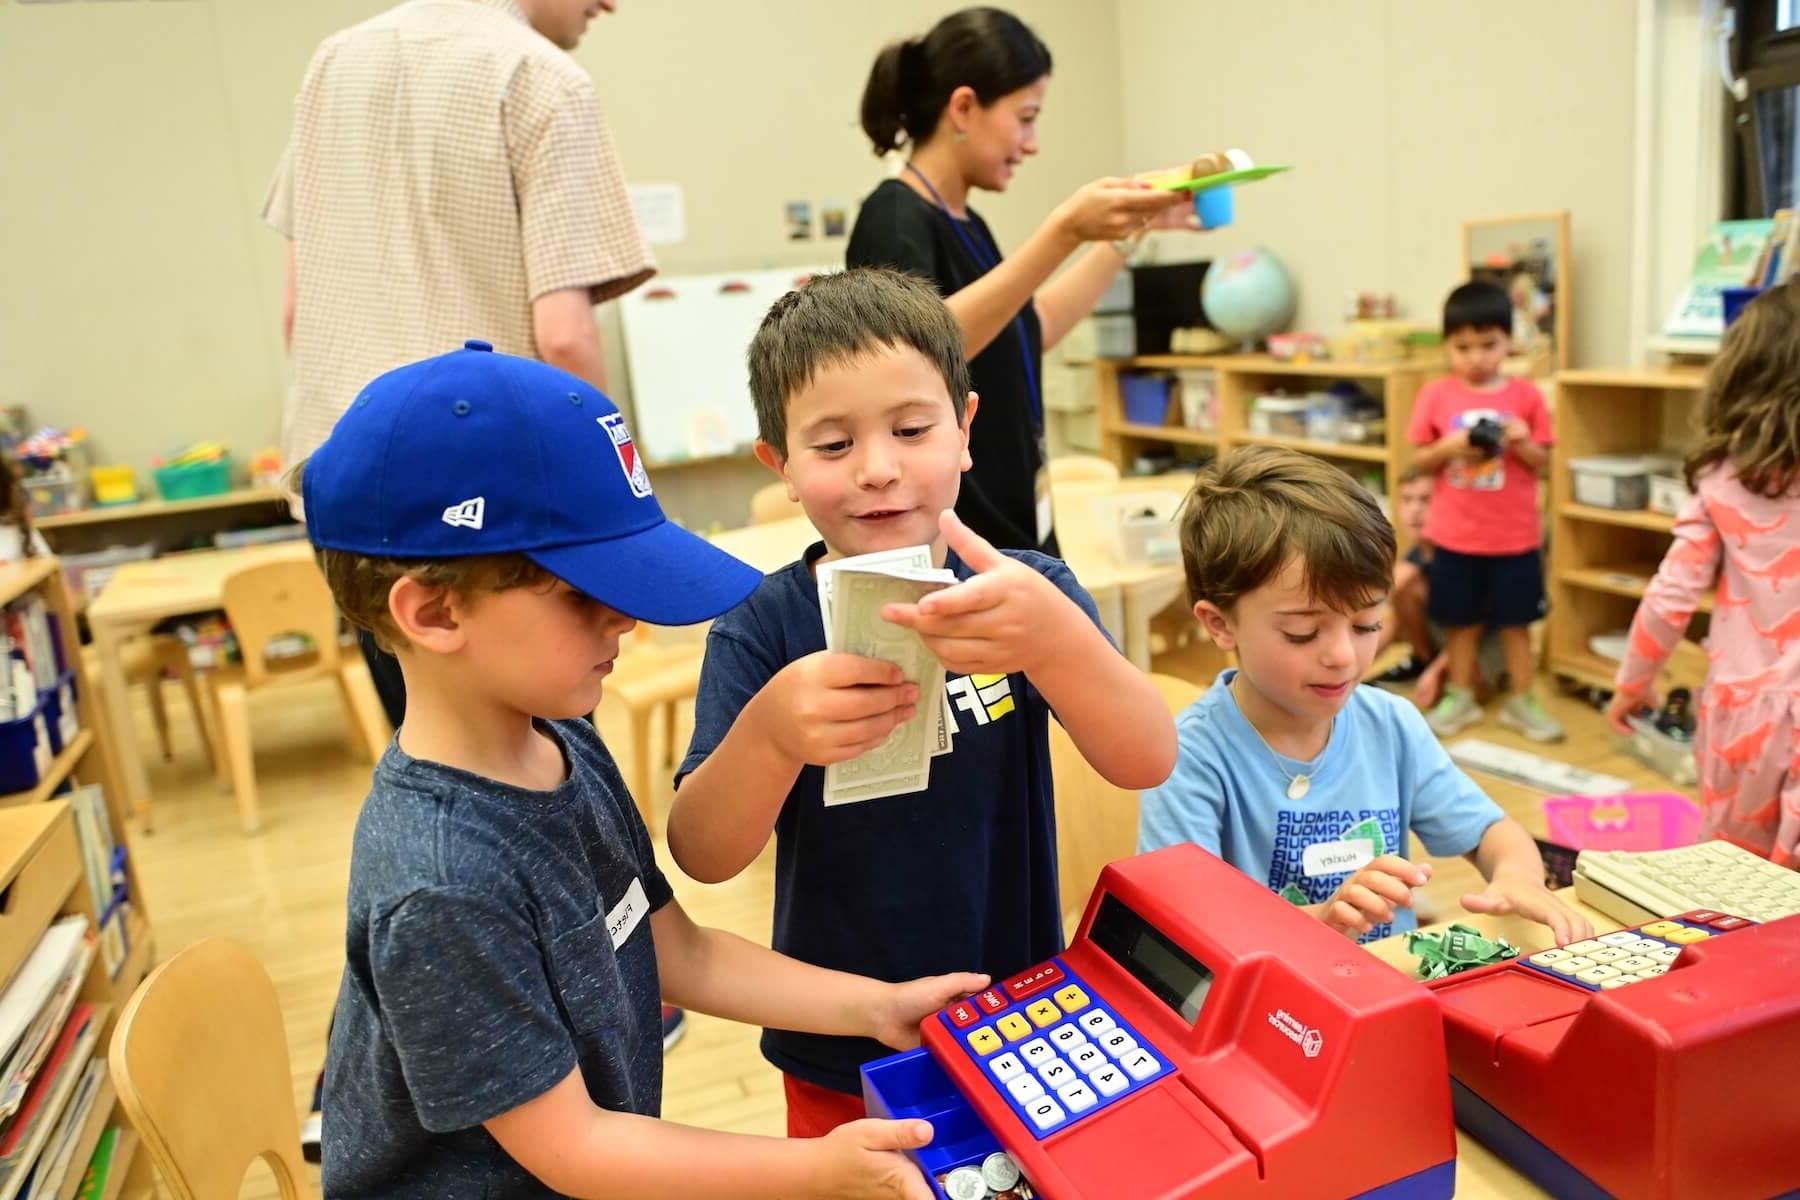 Ethical Culture Fieldston School Ethical Culture students share play money in class